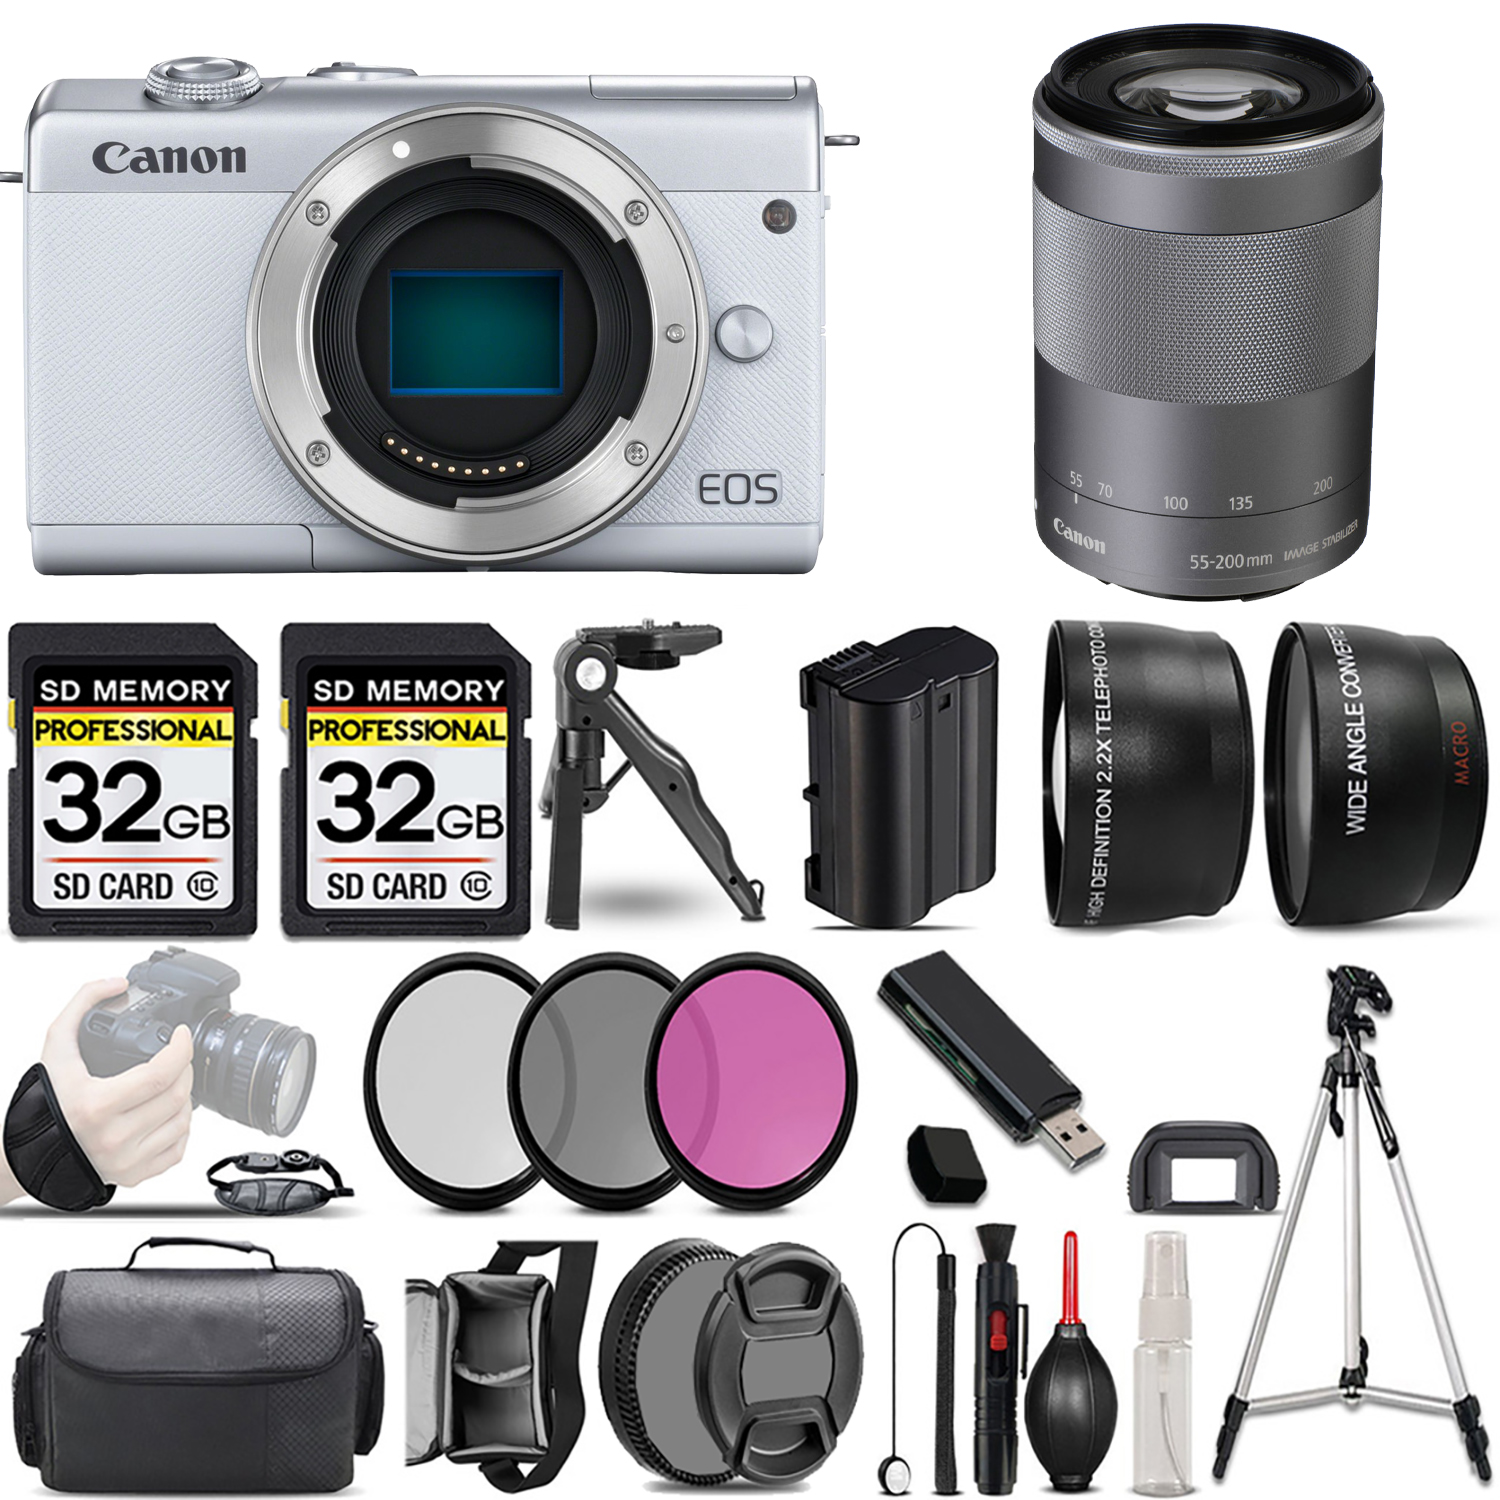 EOS M200 Camera (White) + 55-200mm IS STM Lens (Silver) + 3 Piece Filter Set + 64GB *FREE SHIPPING*